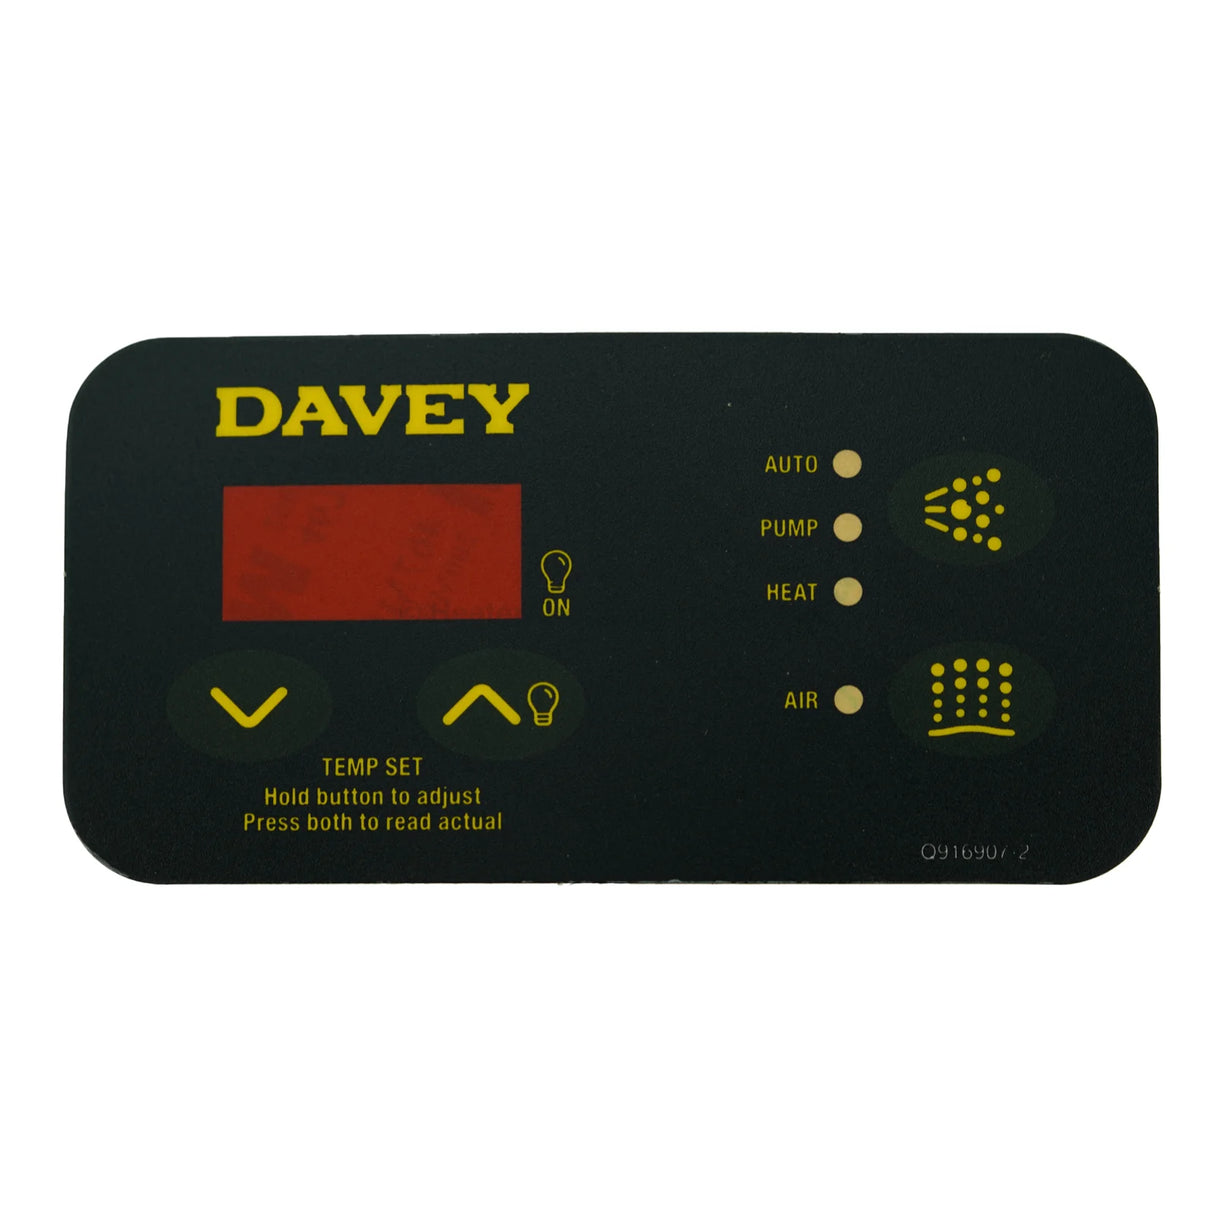 Davey Spaquip Sp400 Sp500 Sp600 Sp601 Rectangular Overlay Decal Sticker For Touchpad Touchpads